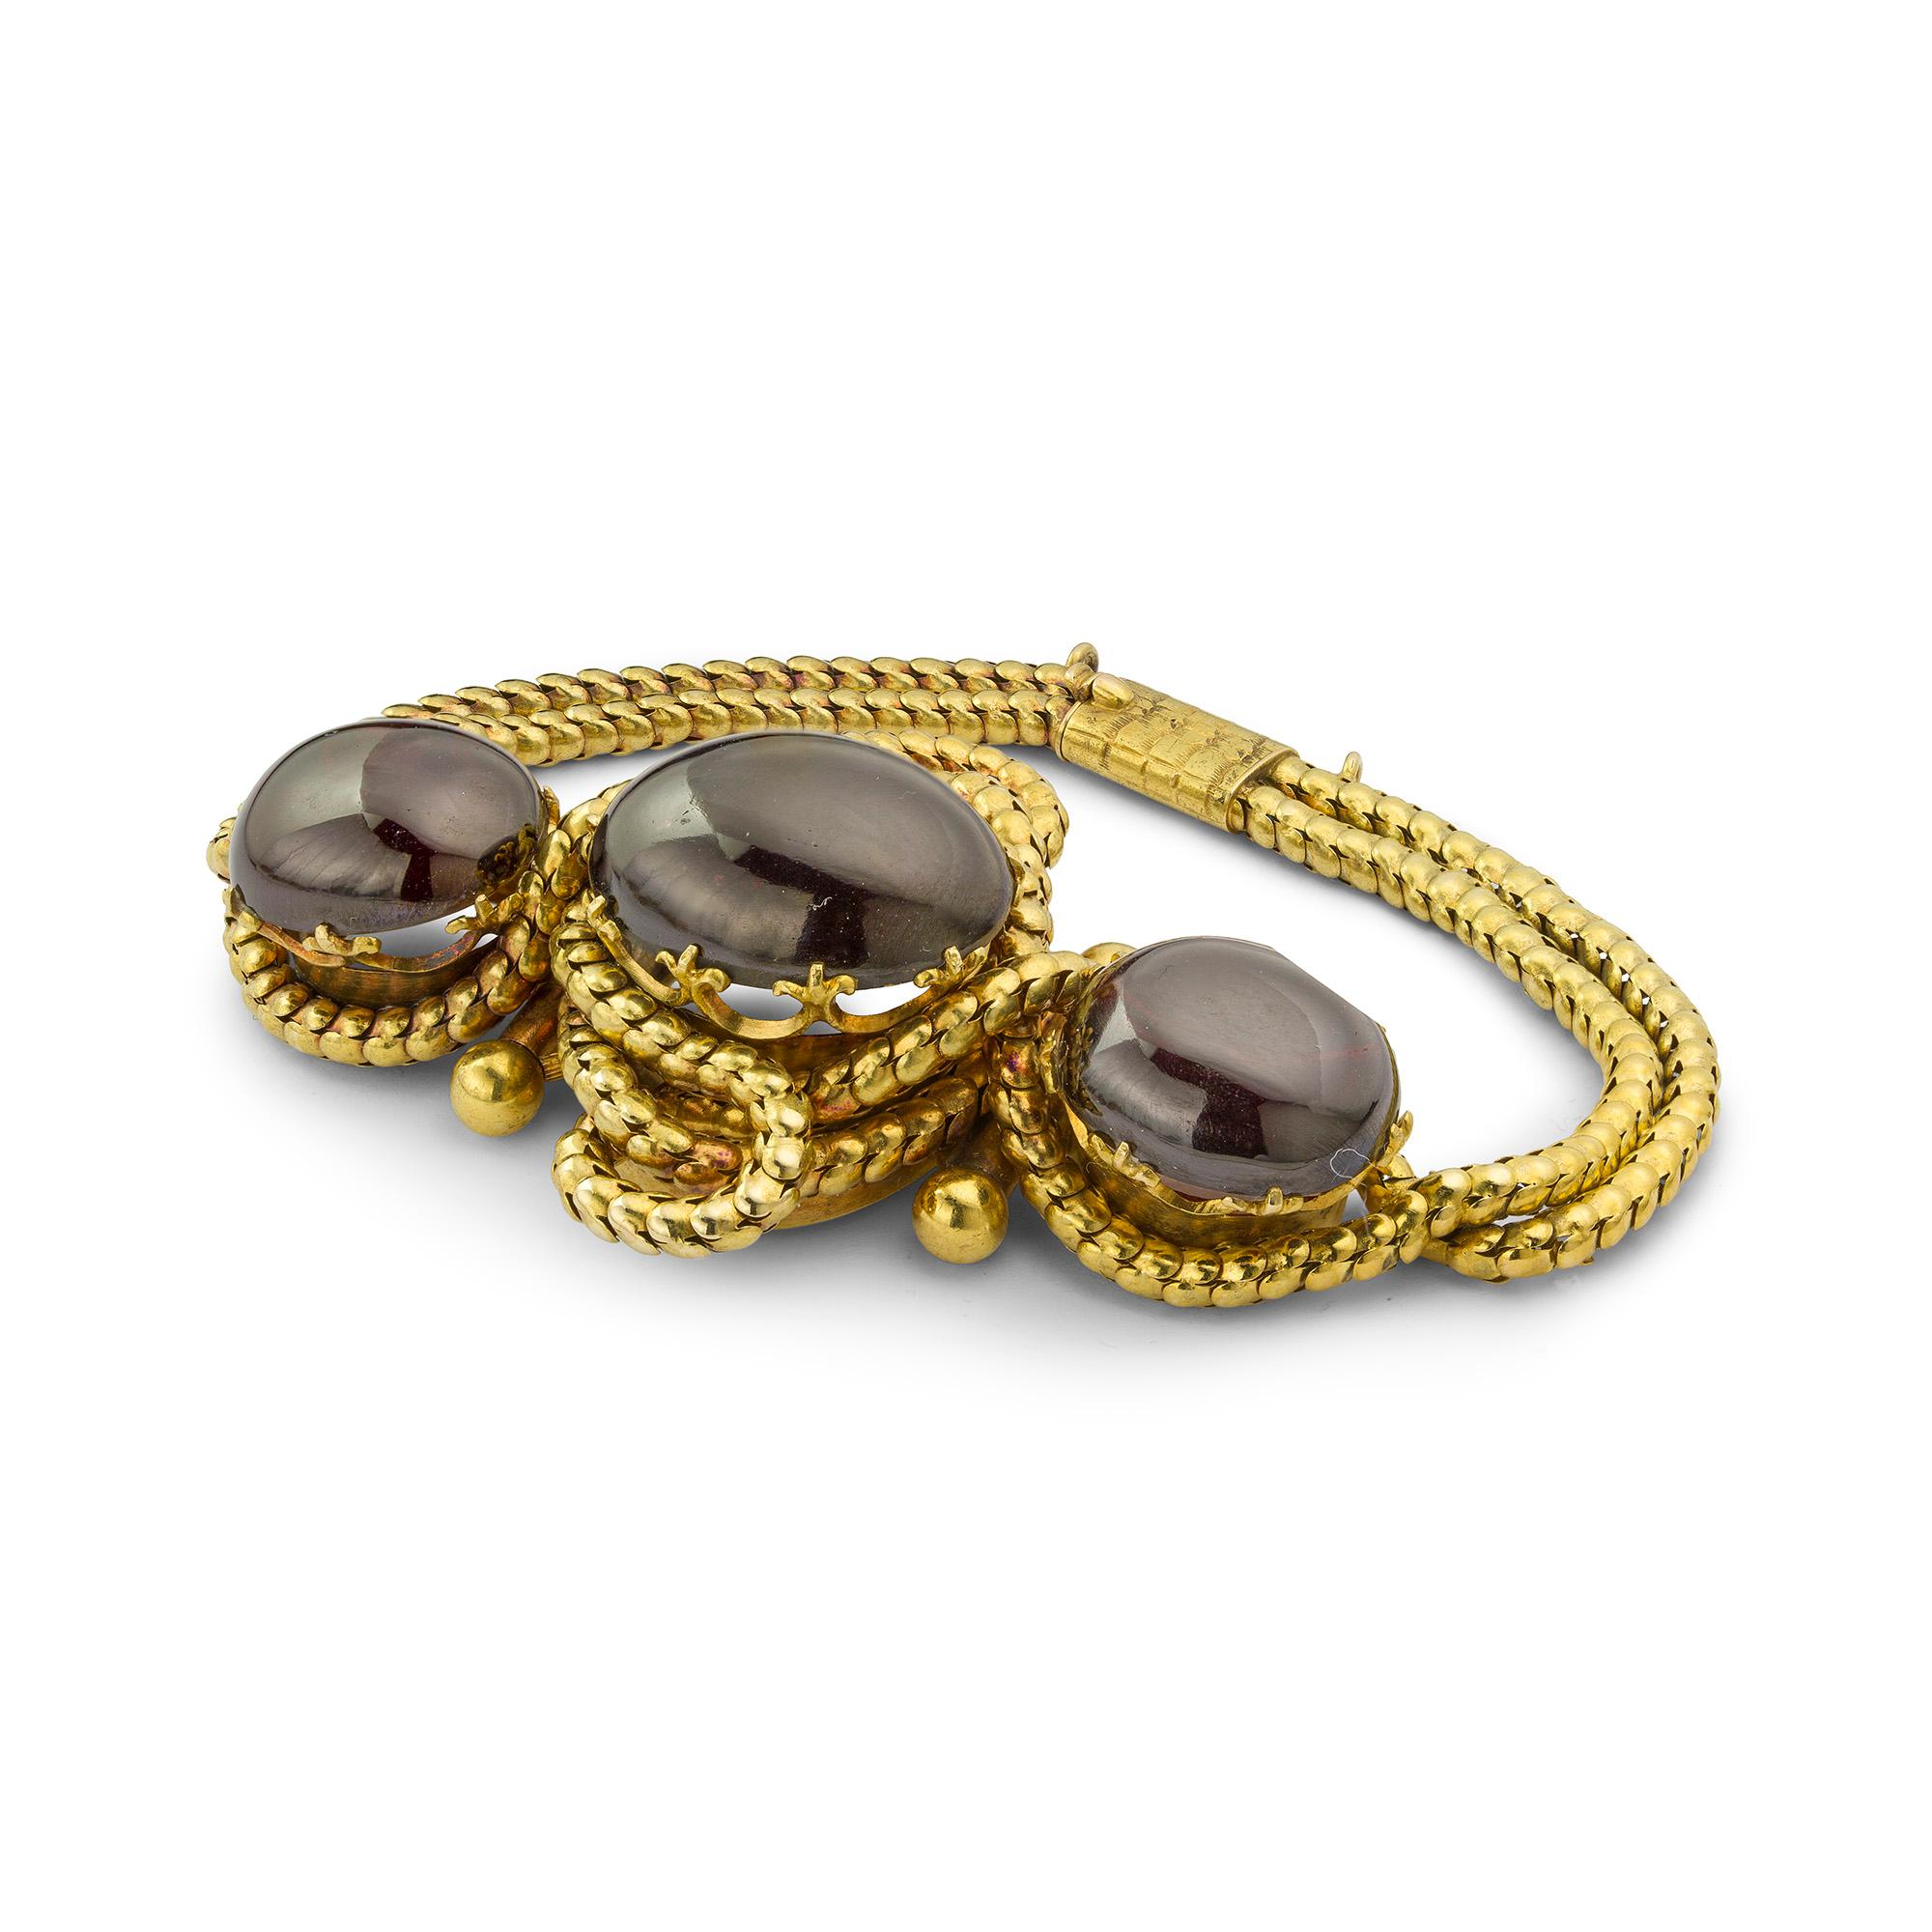 A Victorian cabochon garnet bracelet, the centre oval cabochon garnet flanked by two smaller oval shape cabochon garnets, each set in fleur-de-lis designed claws, surrounded by a knotted gold chain in a figure-of-eight, circa 1850, measuring